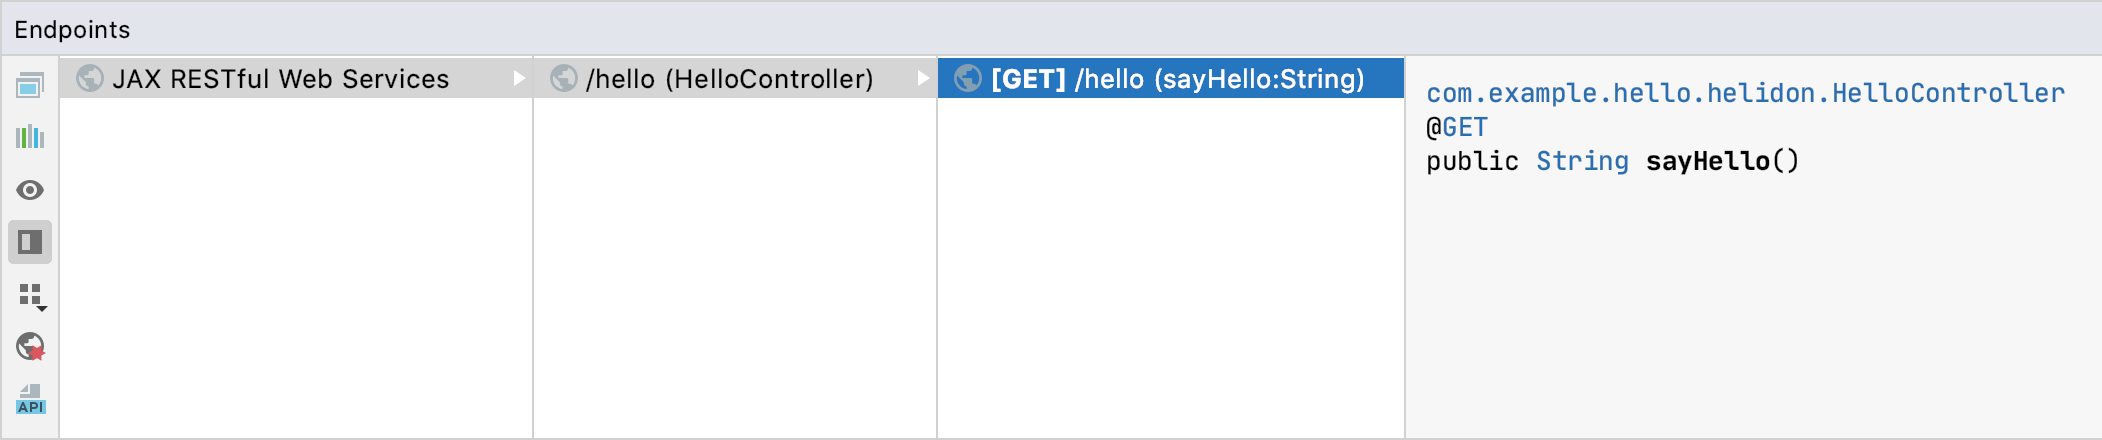 HelloController endpoint in the Endpoints tool window